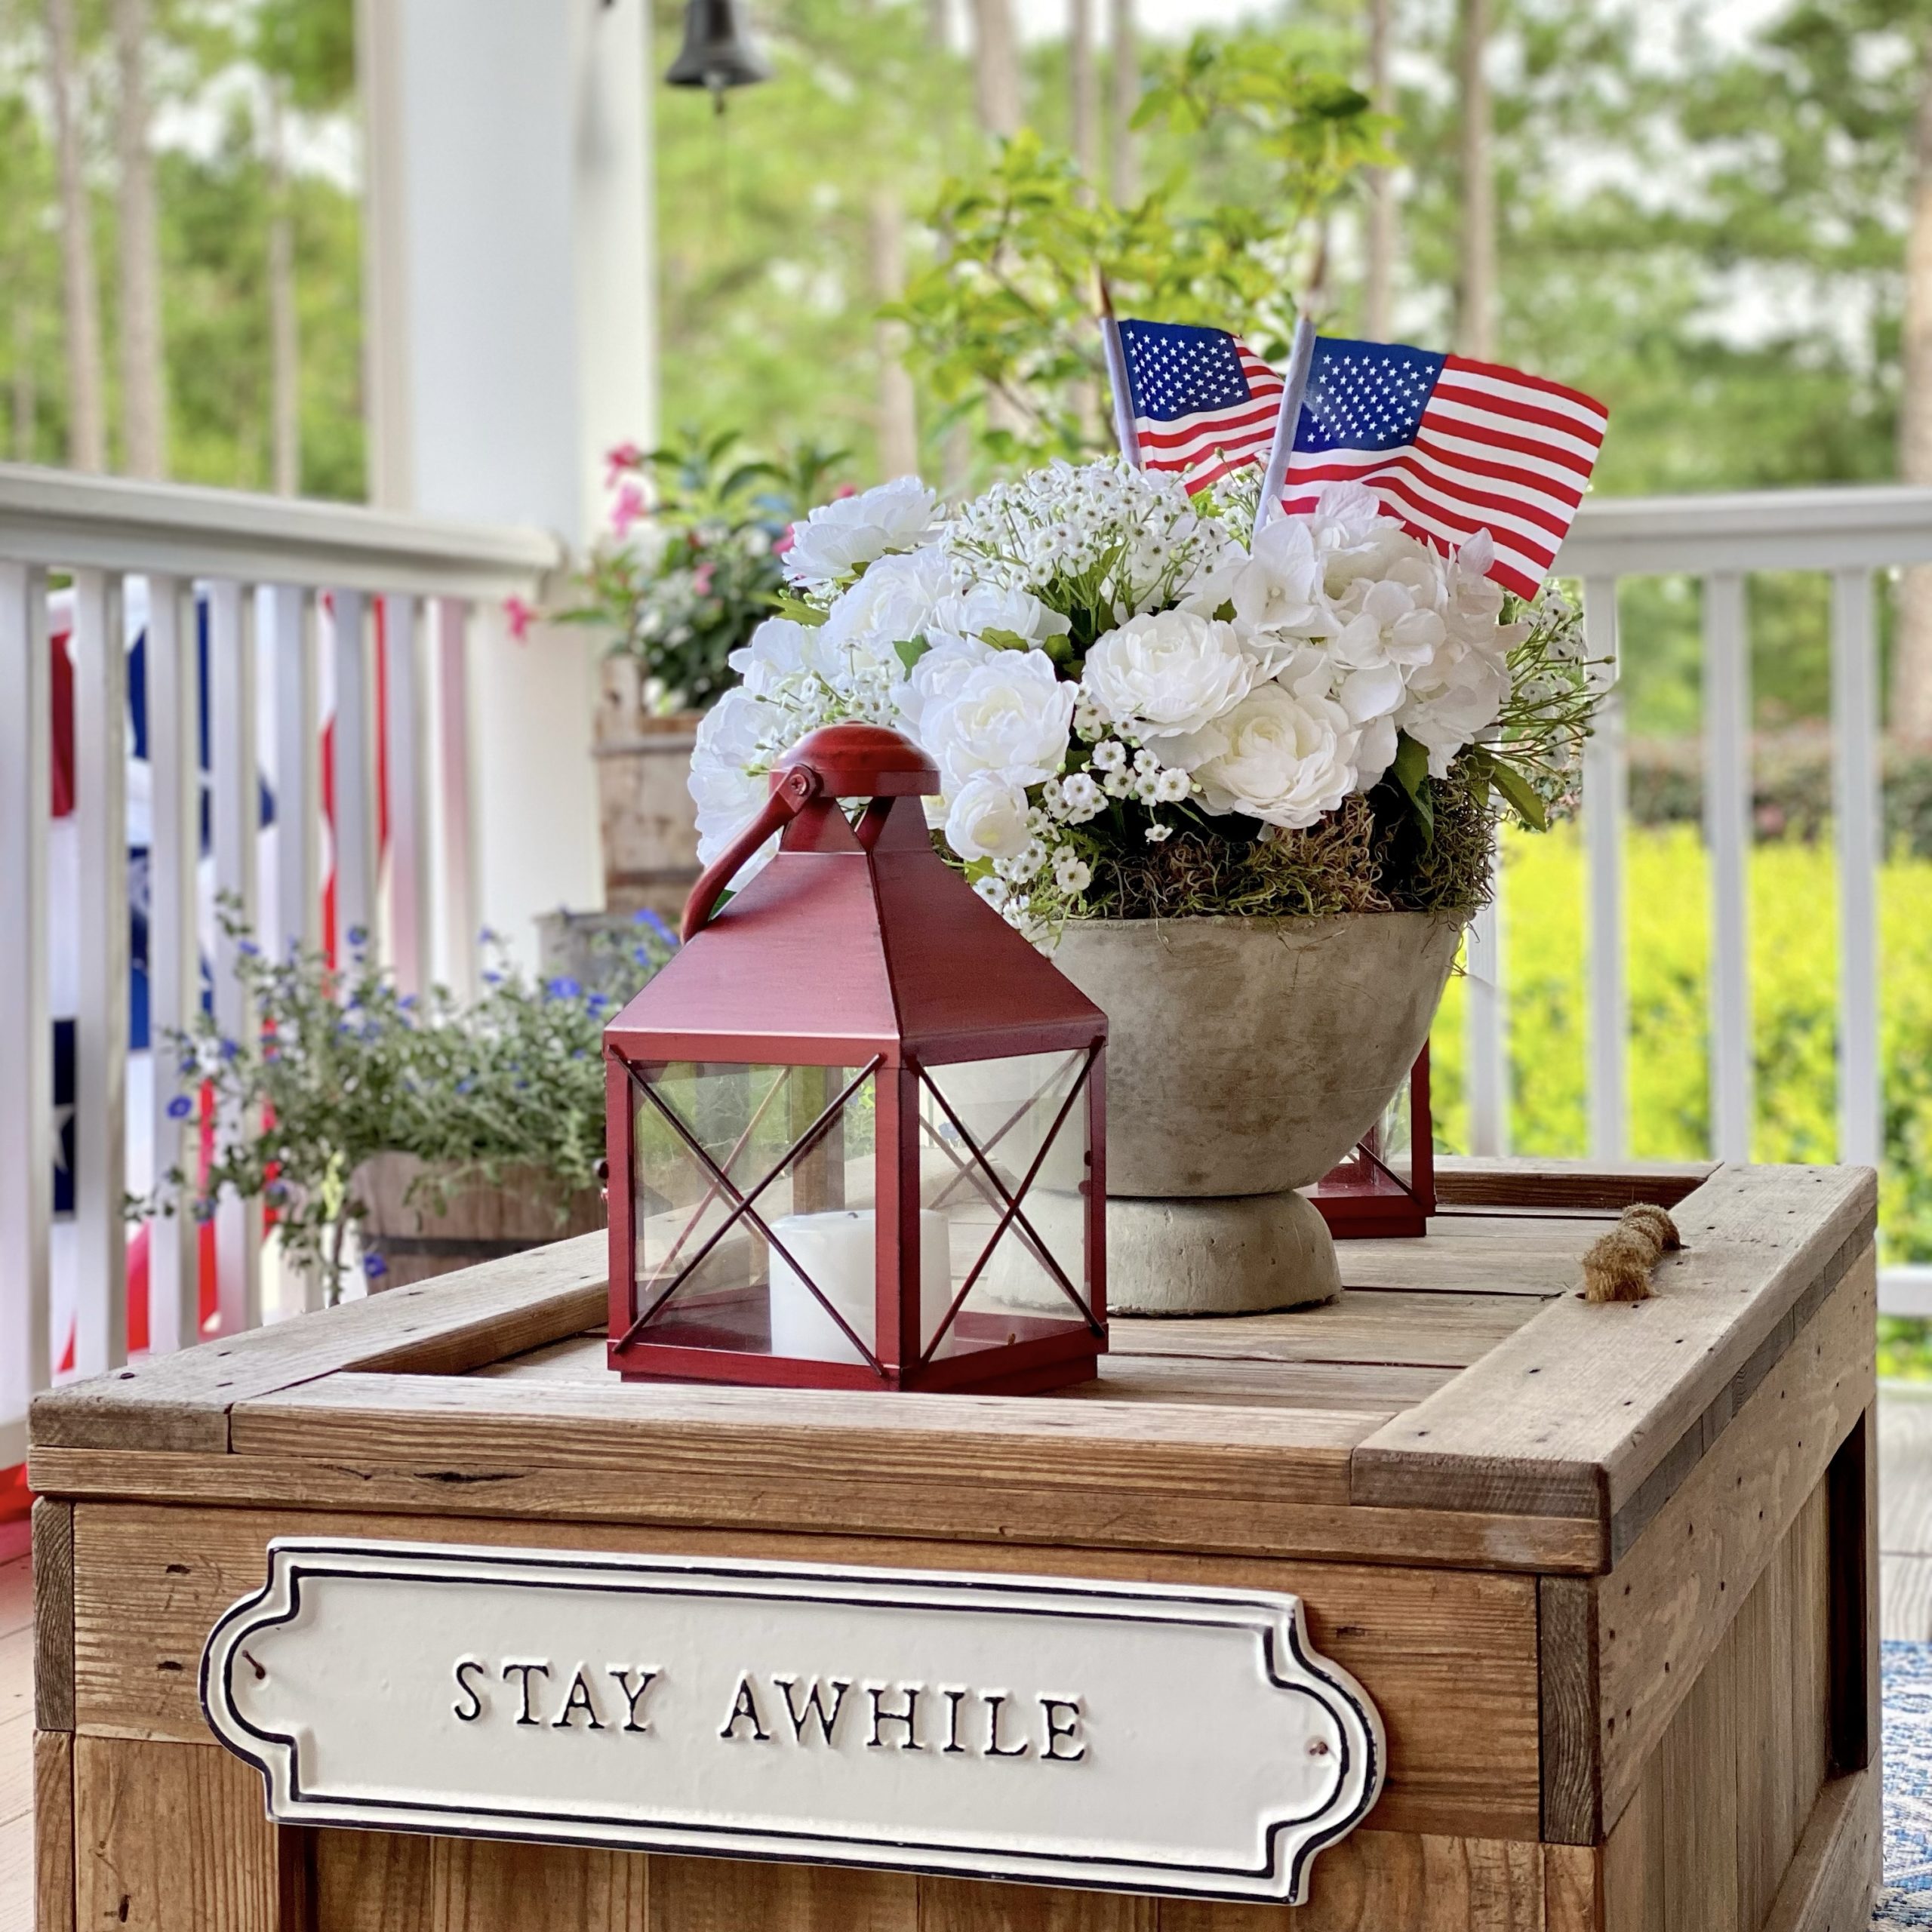 Wood trunk coffee table styled with a red lantern and a white flower arrangement in a concrete pedestal bowl with American flags.